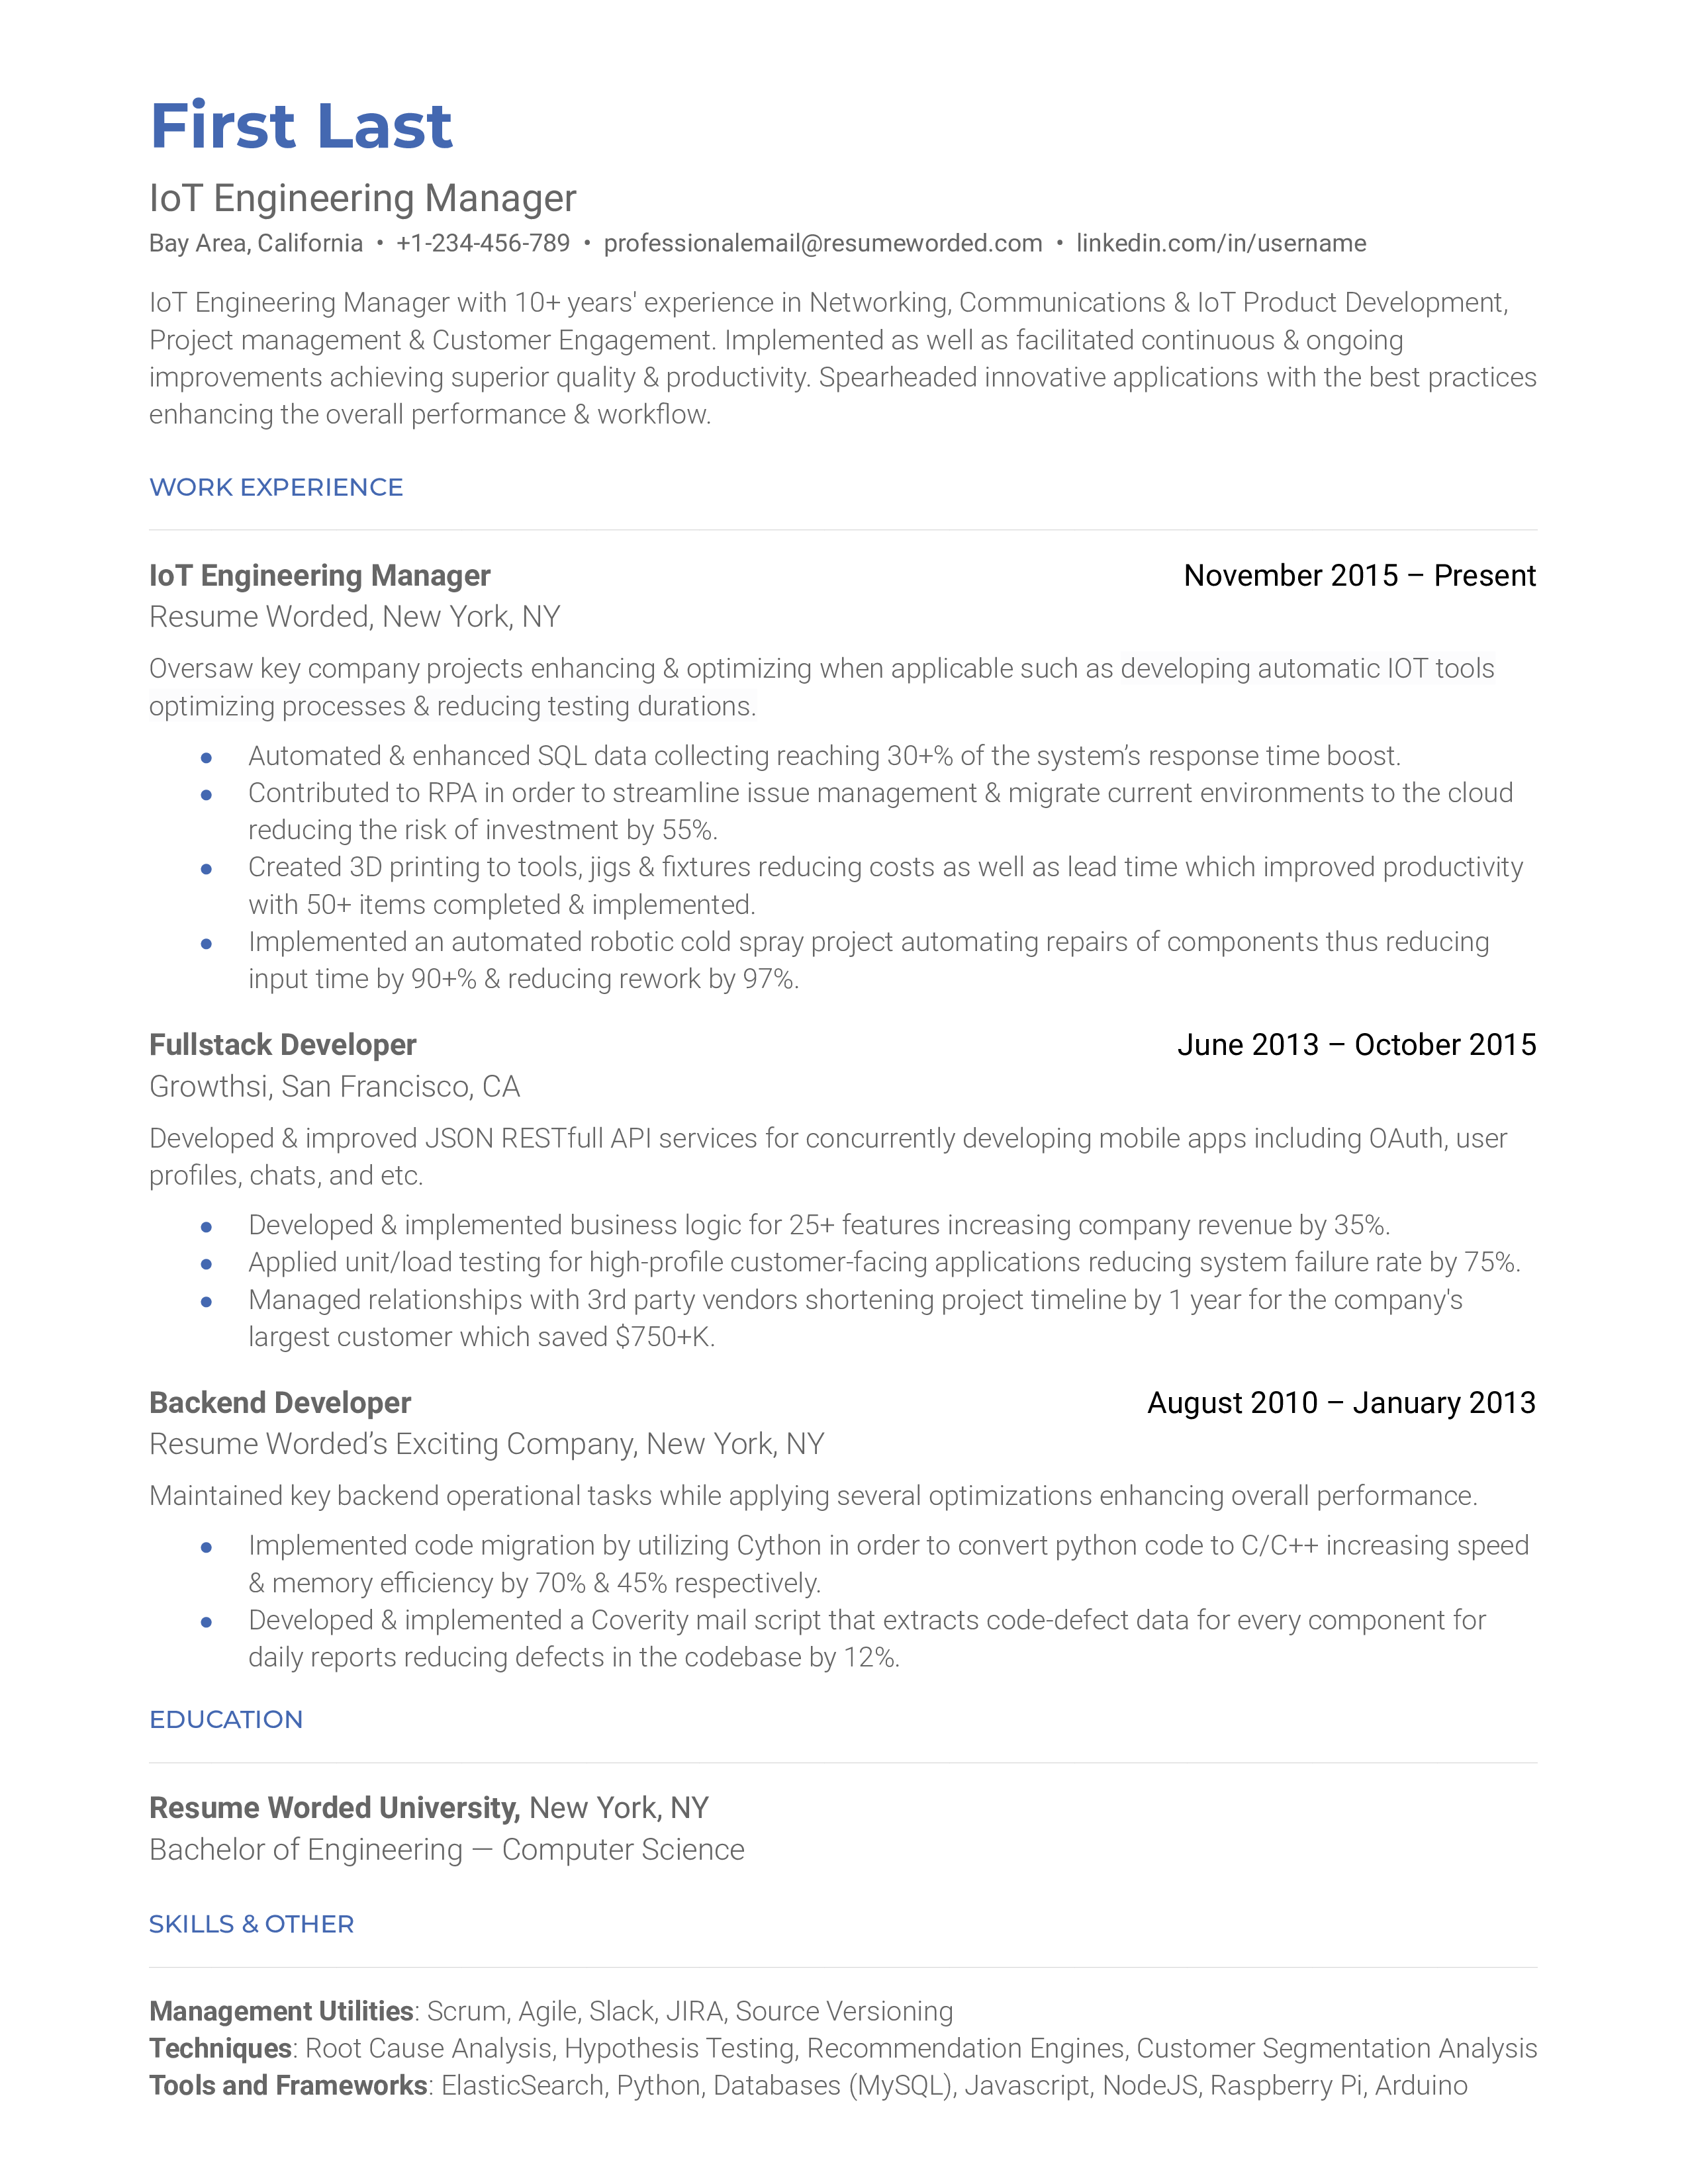 A CV showcasing skills and experiences for the IoT Engineering Manager role.